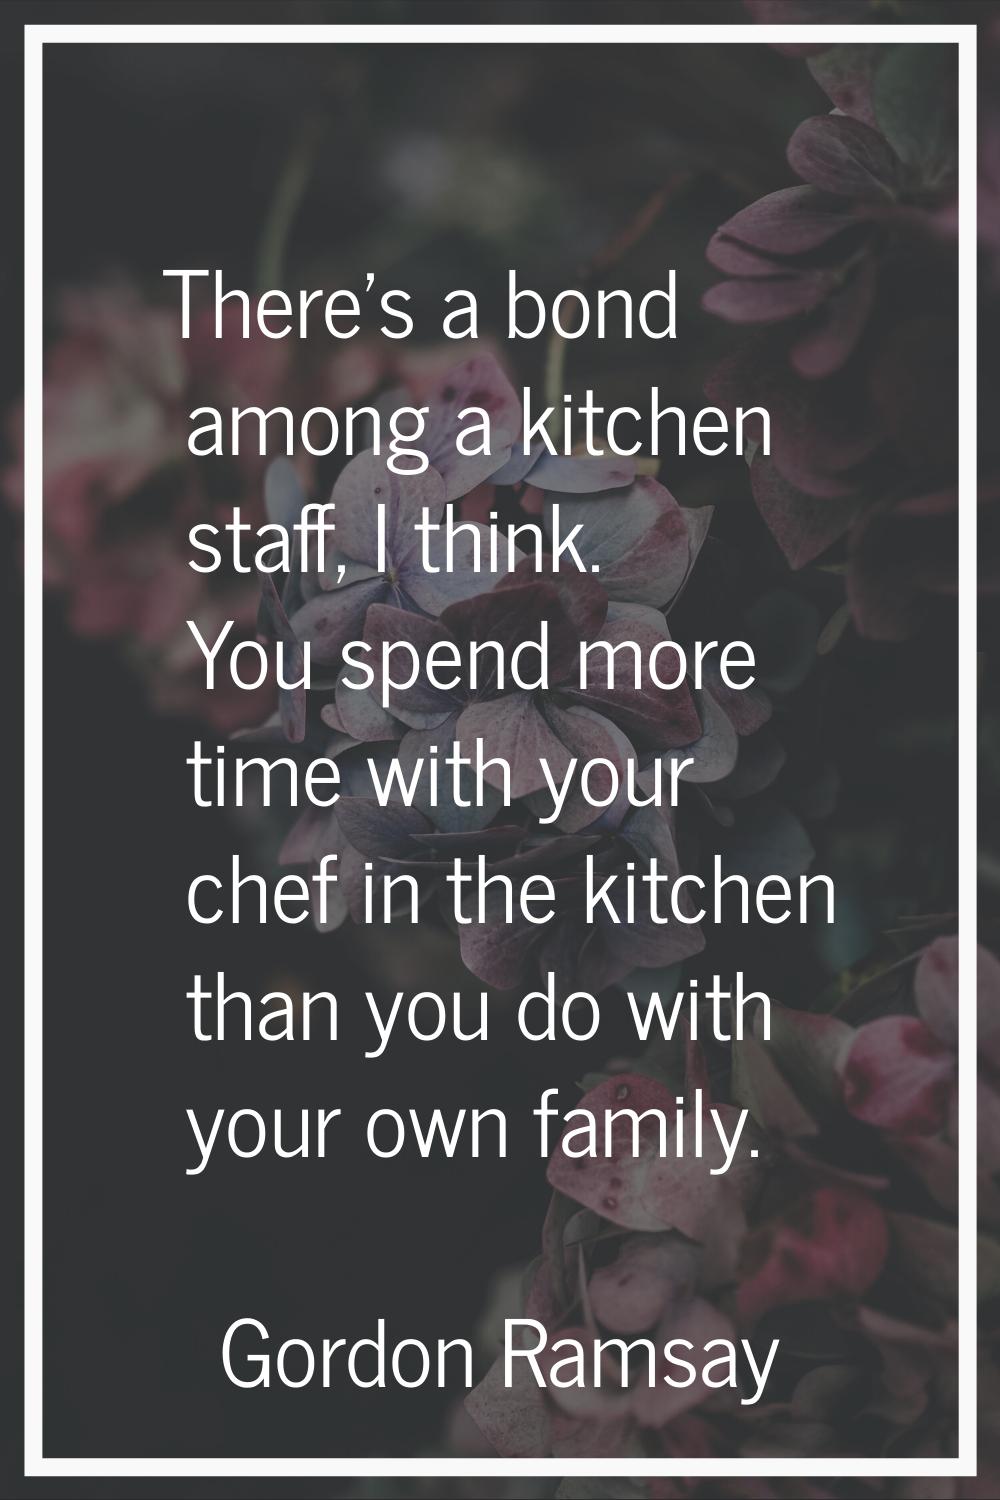 There's a bond among a kitchen staff, I think. You spend more time with your chef in the kitchen th